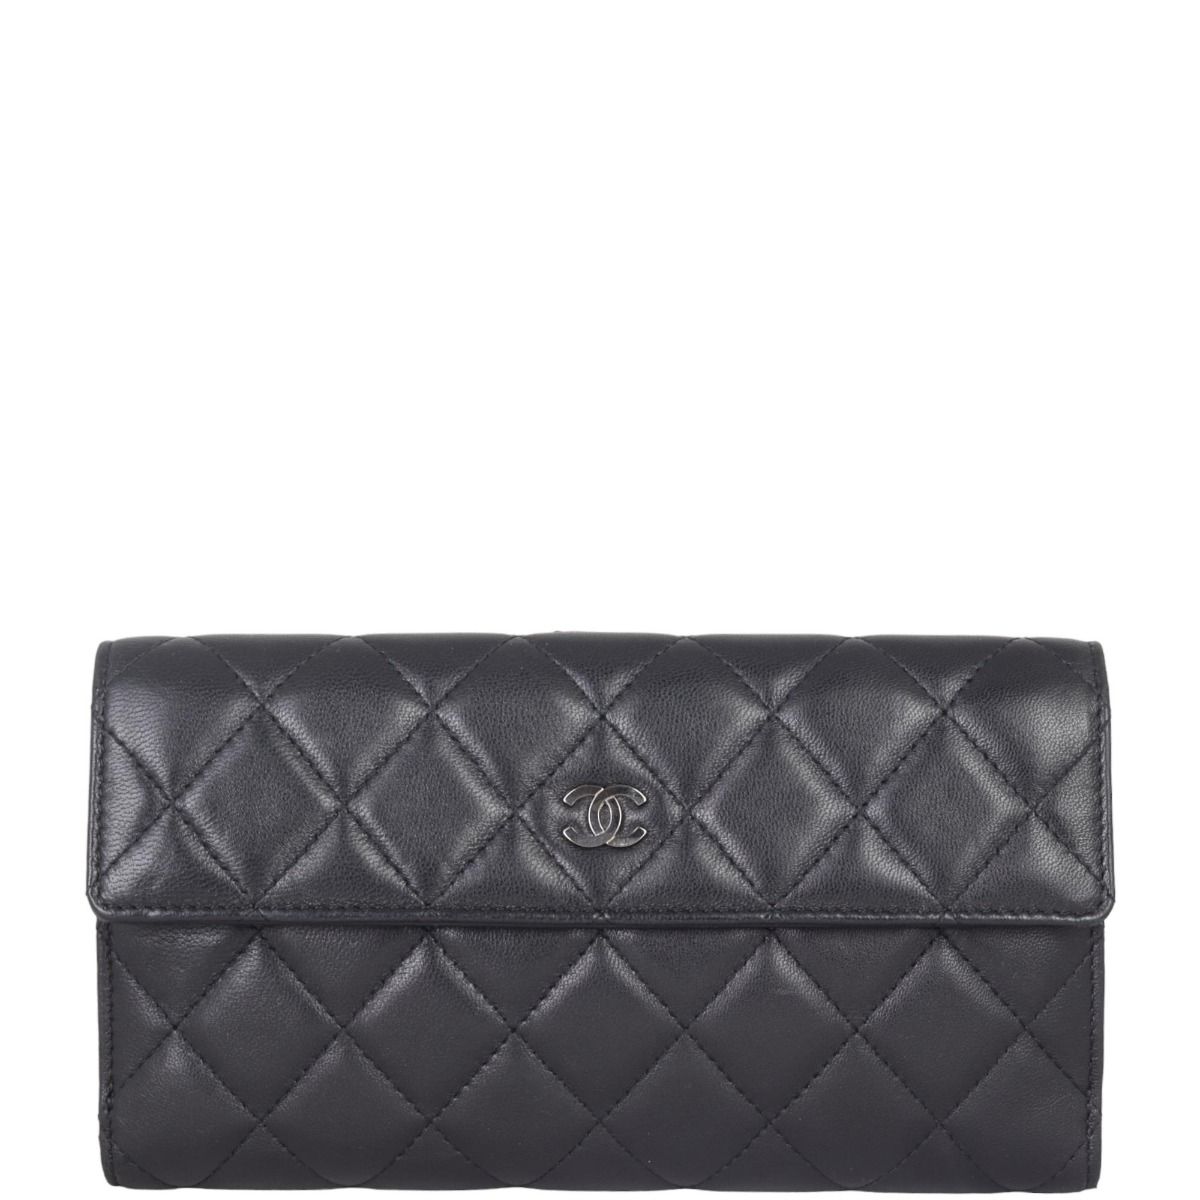 purse conversion kit for chanel wallet